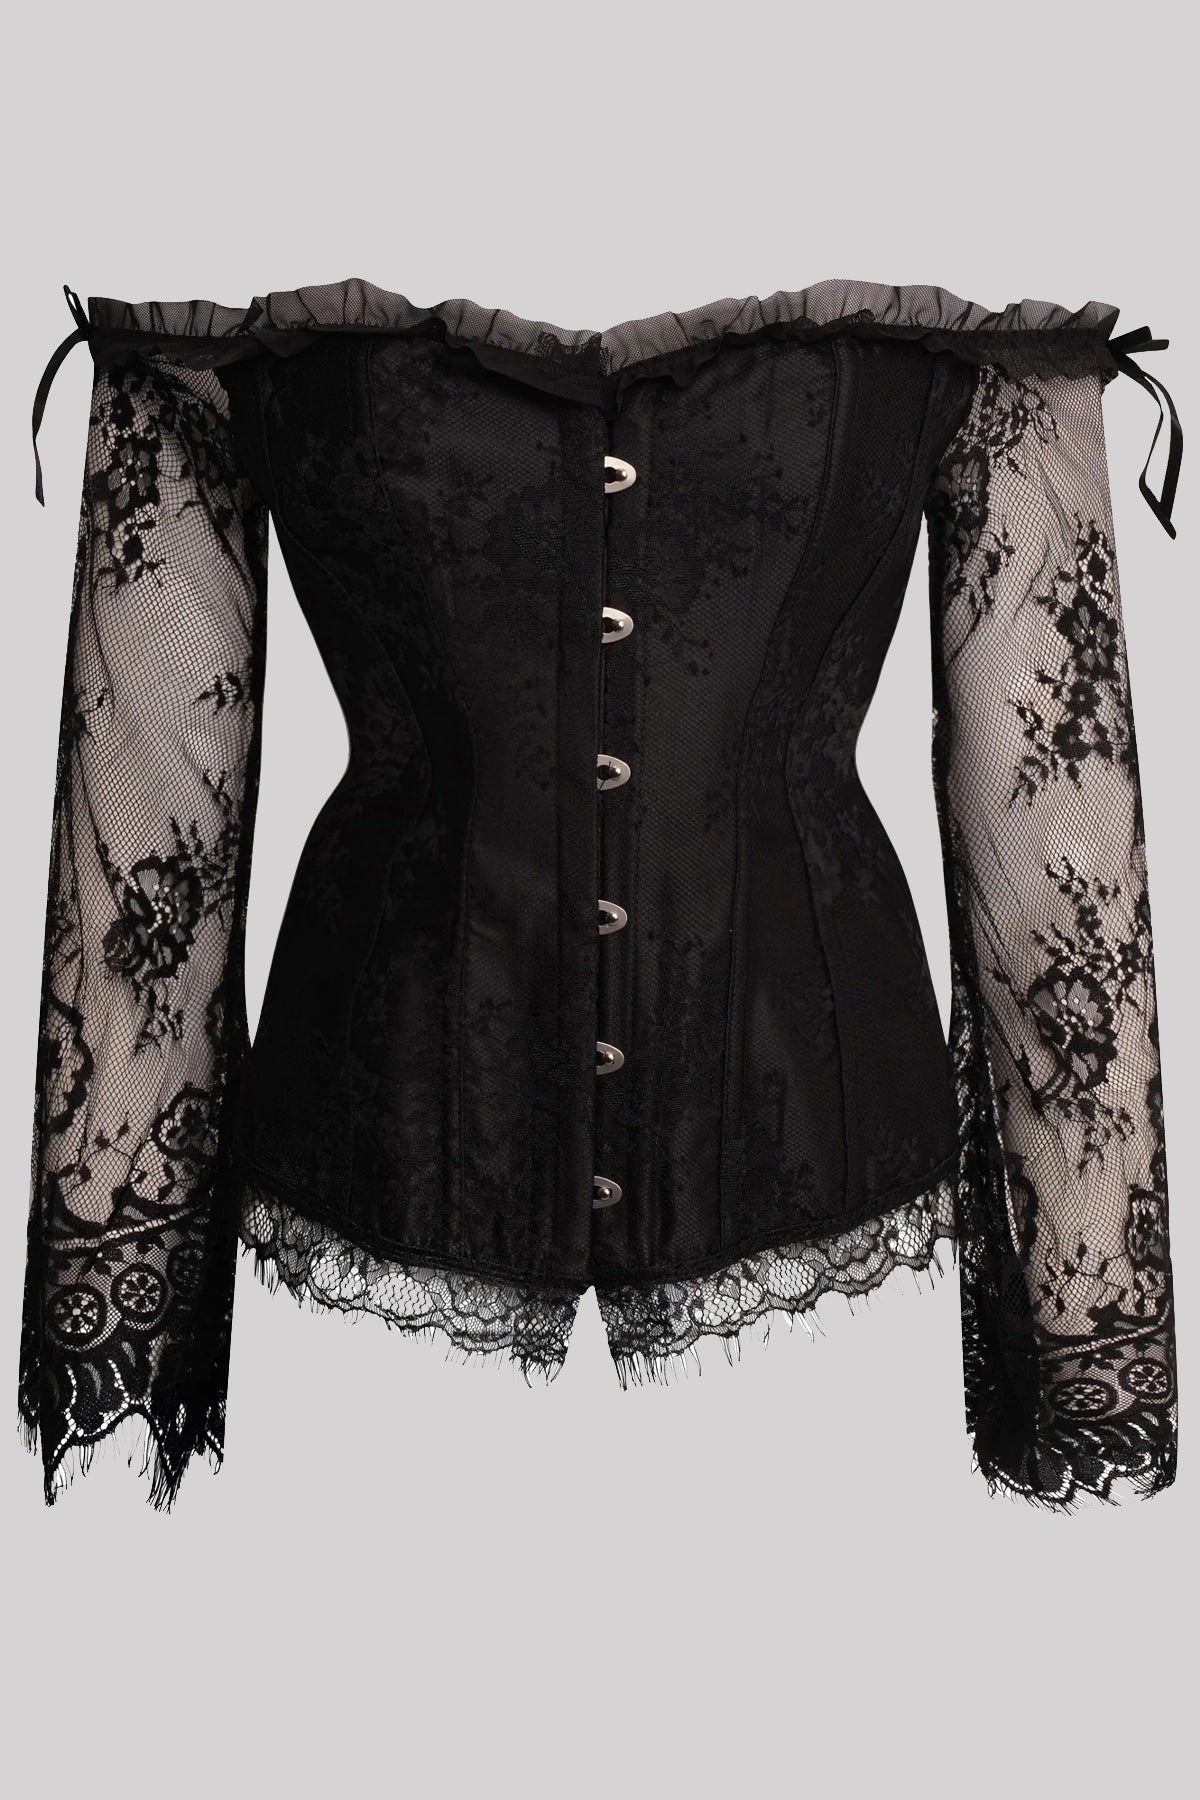 Ro Rox Roxanne Lace Gothic Long Sleeve Overbust Corset